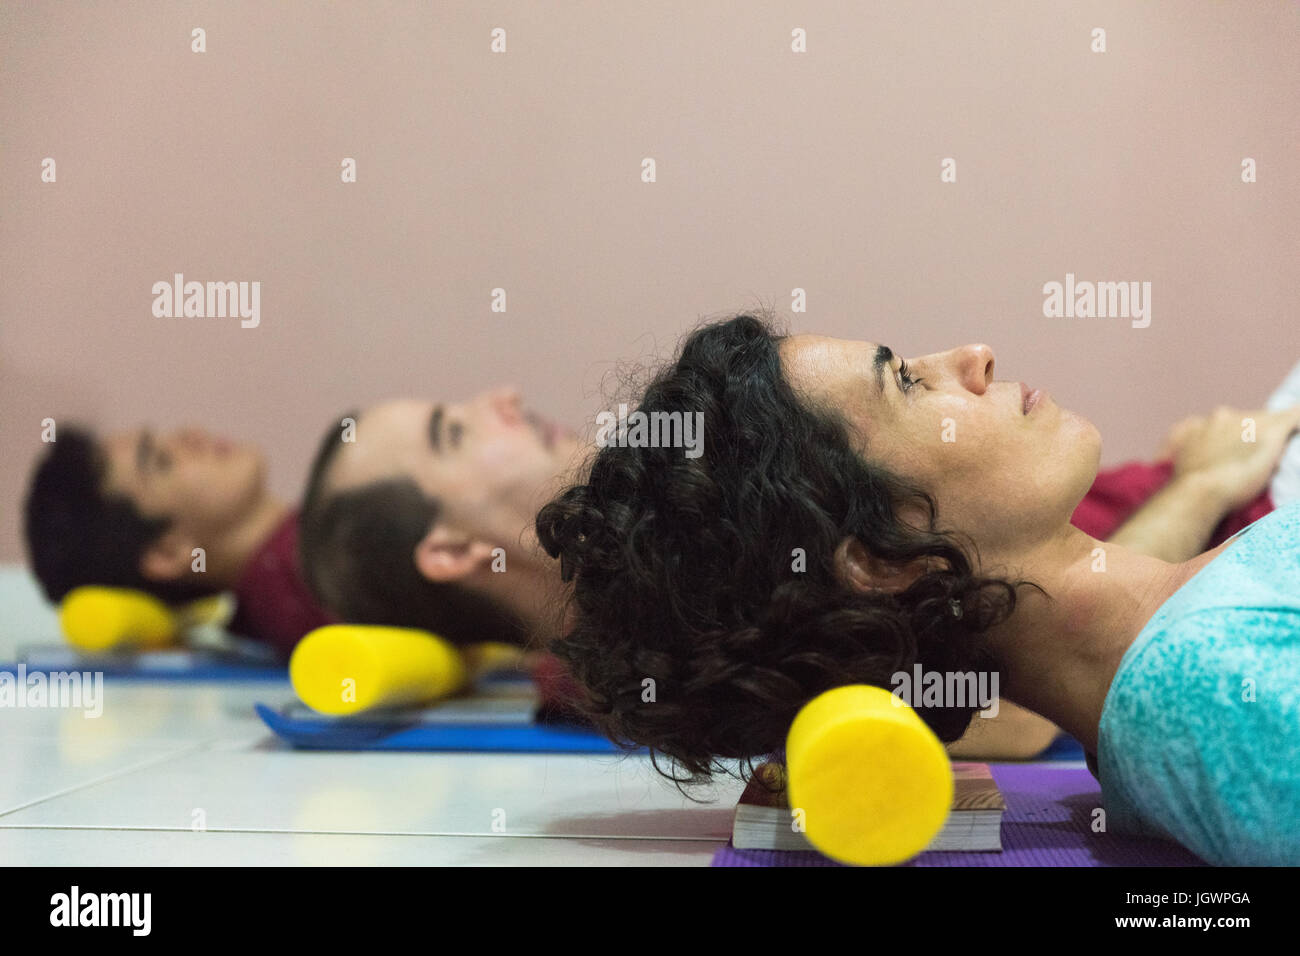 People at yoga class resting head on block Stock Photo